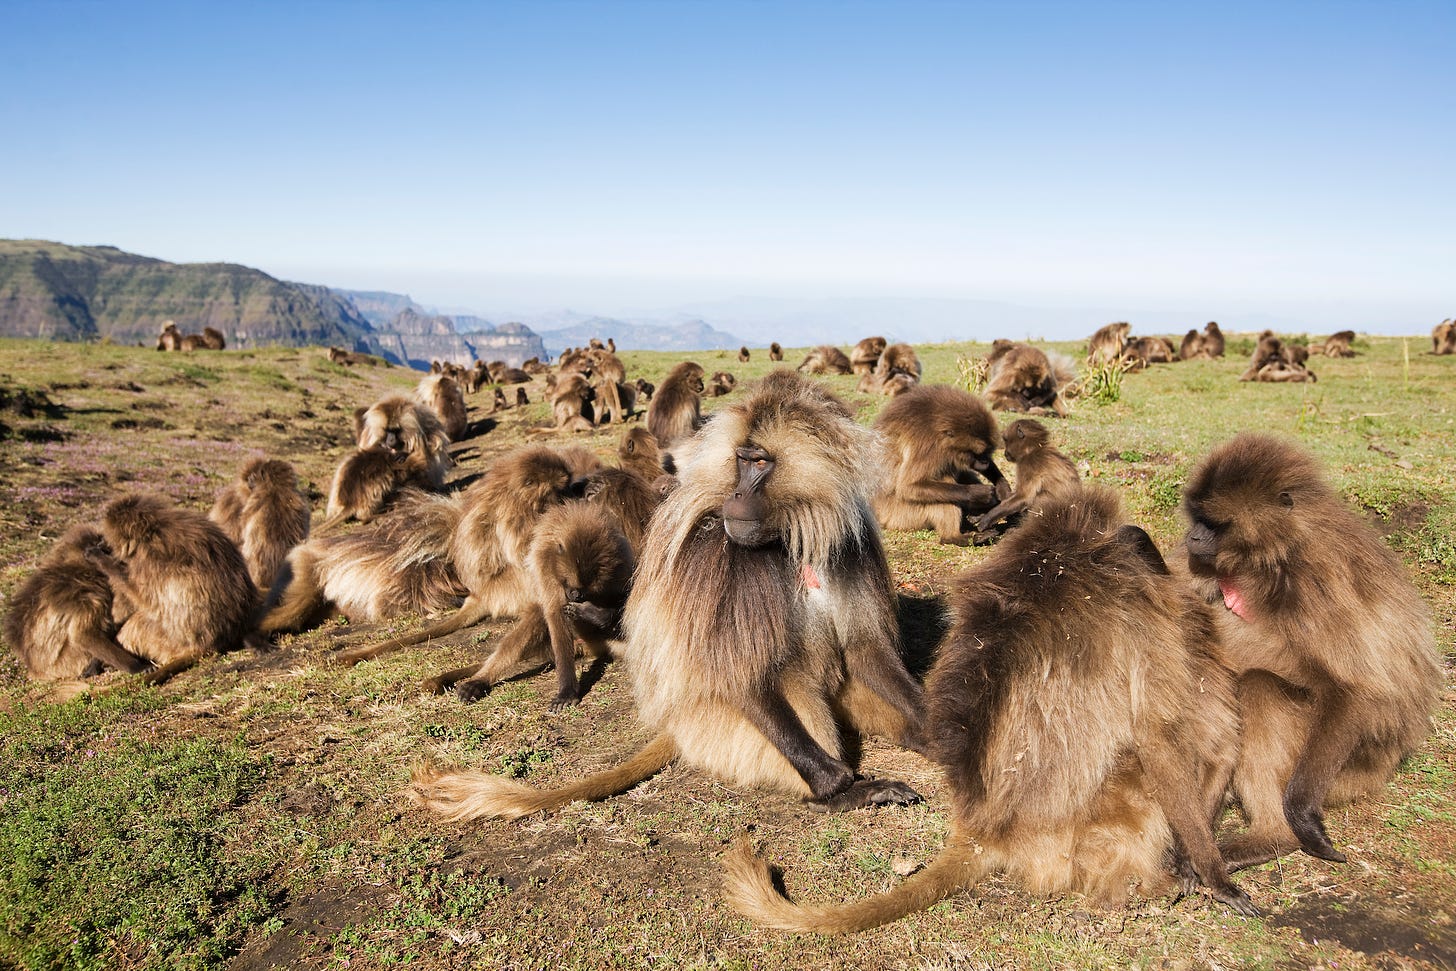 Geladas (not chacma baboons)